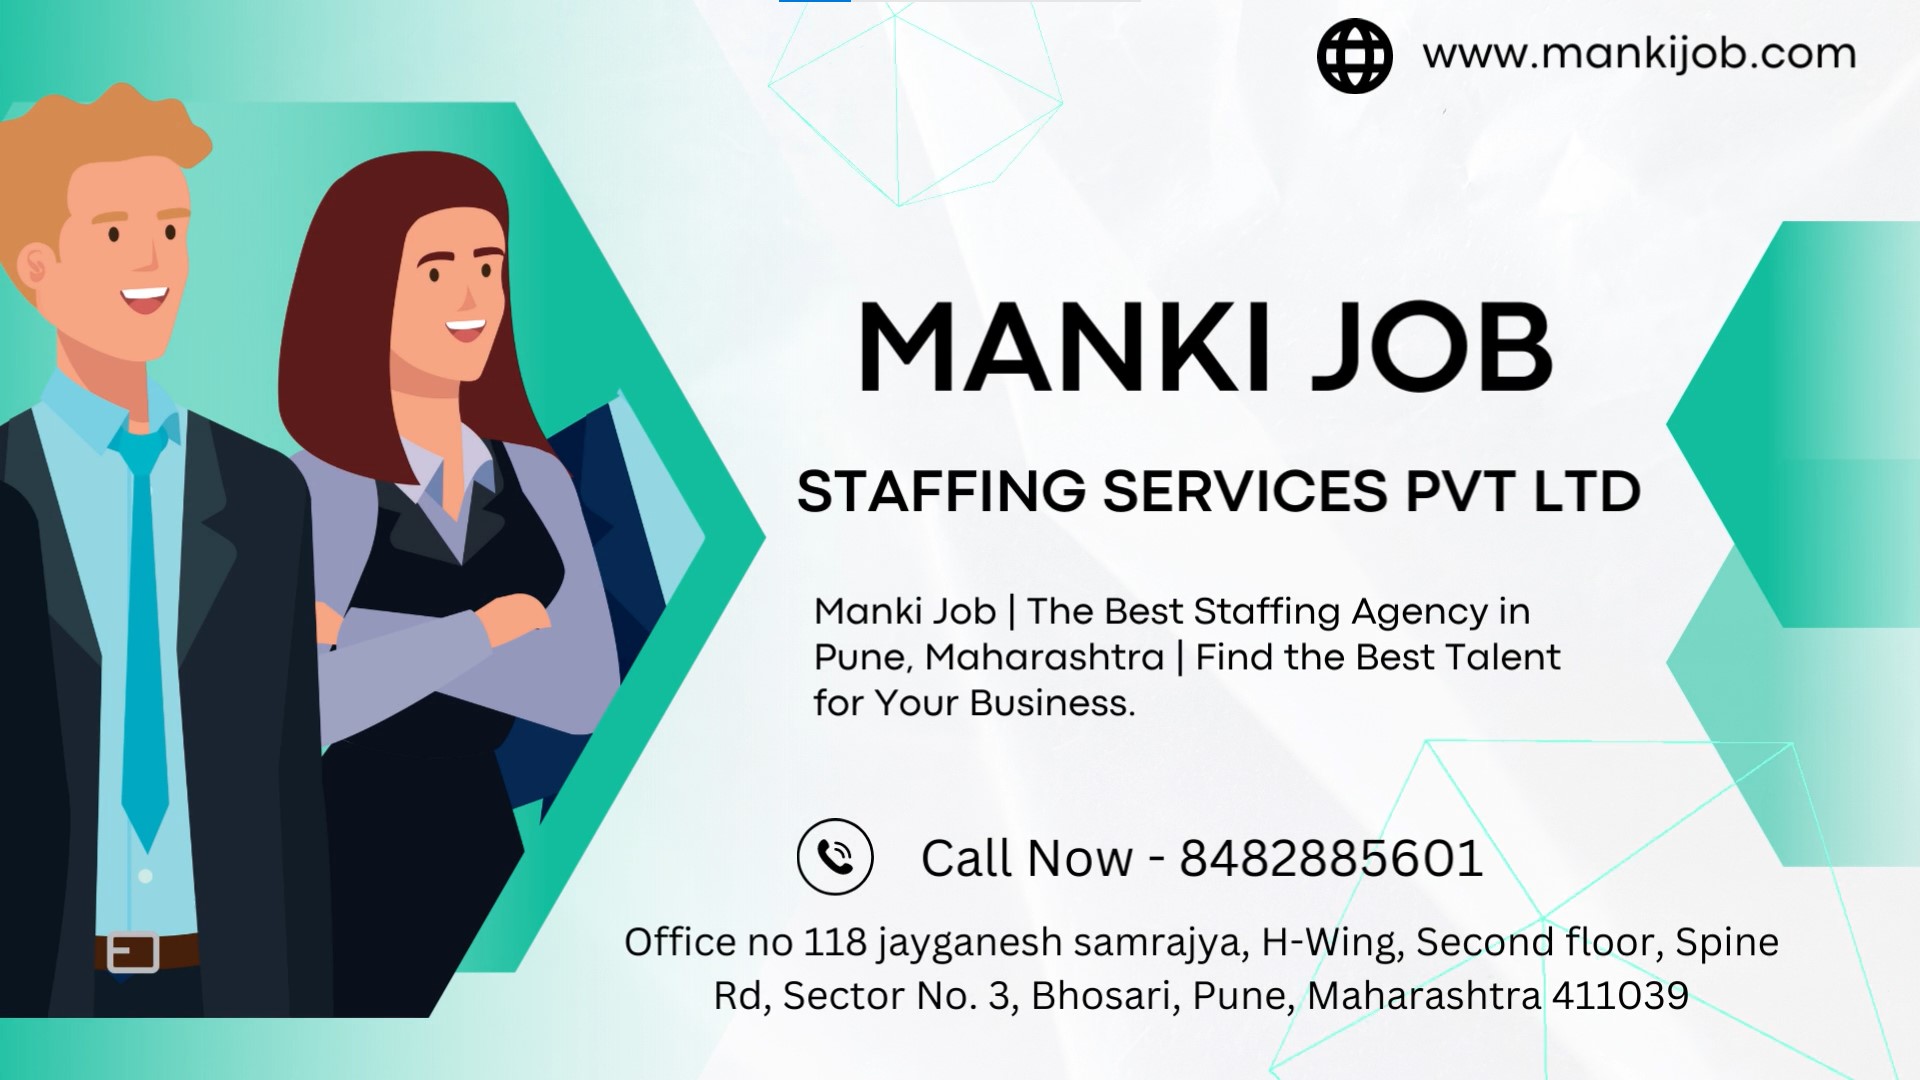 Manki Job | The Best Staffing Agency in Pune, Maharashtra | Find the Best Talent for Your Business.